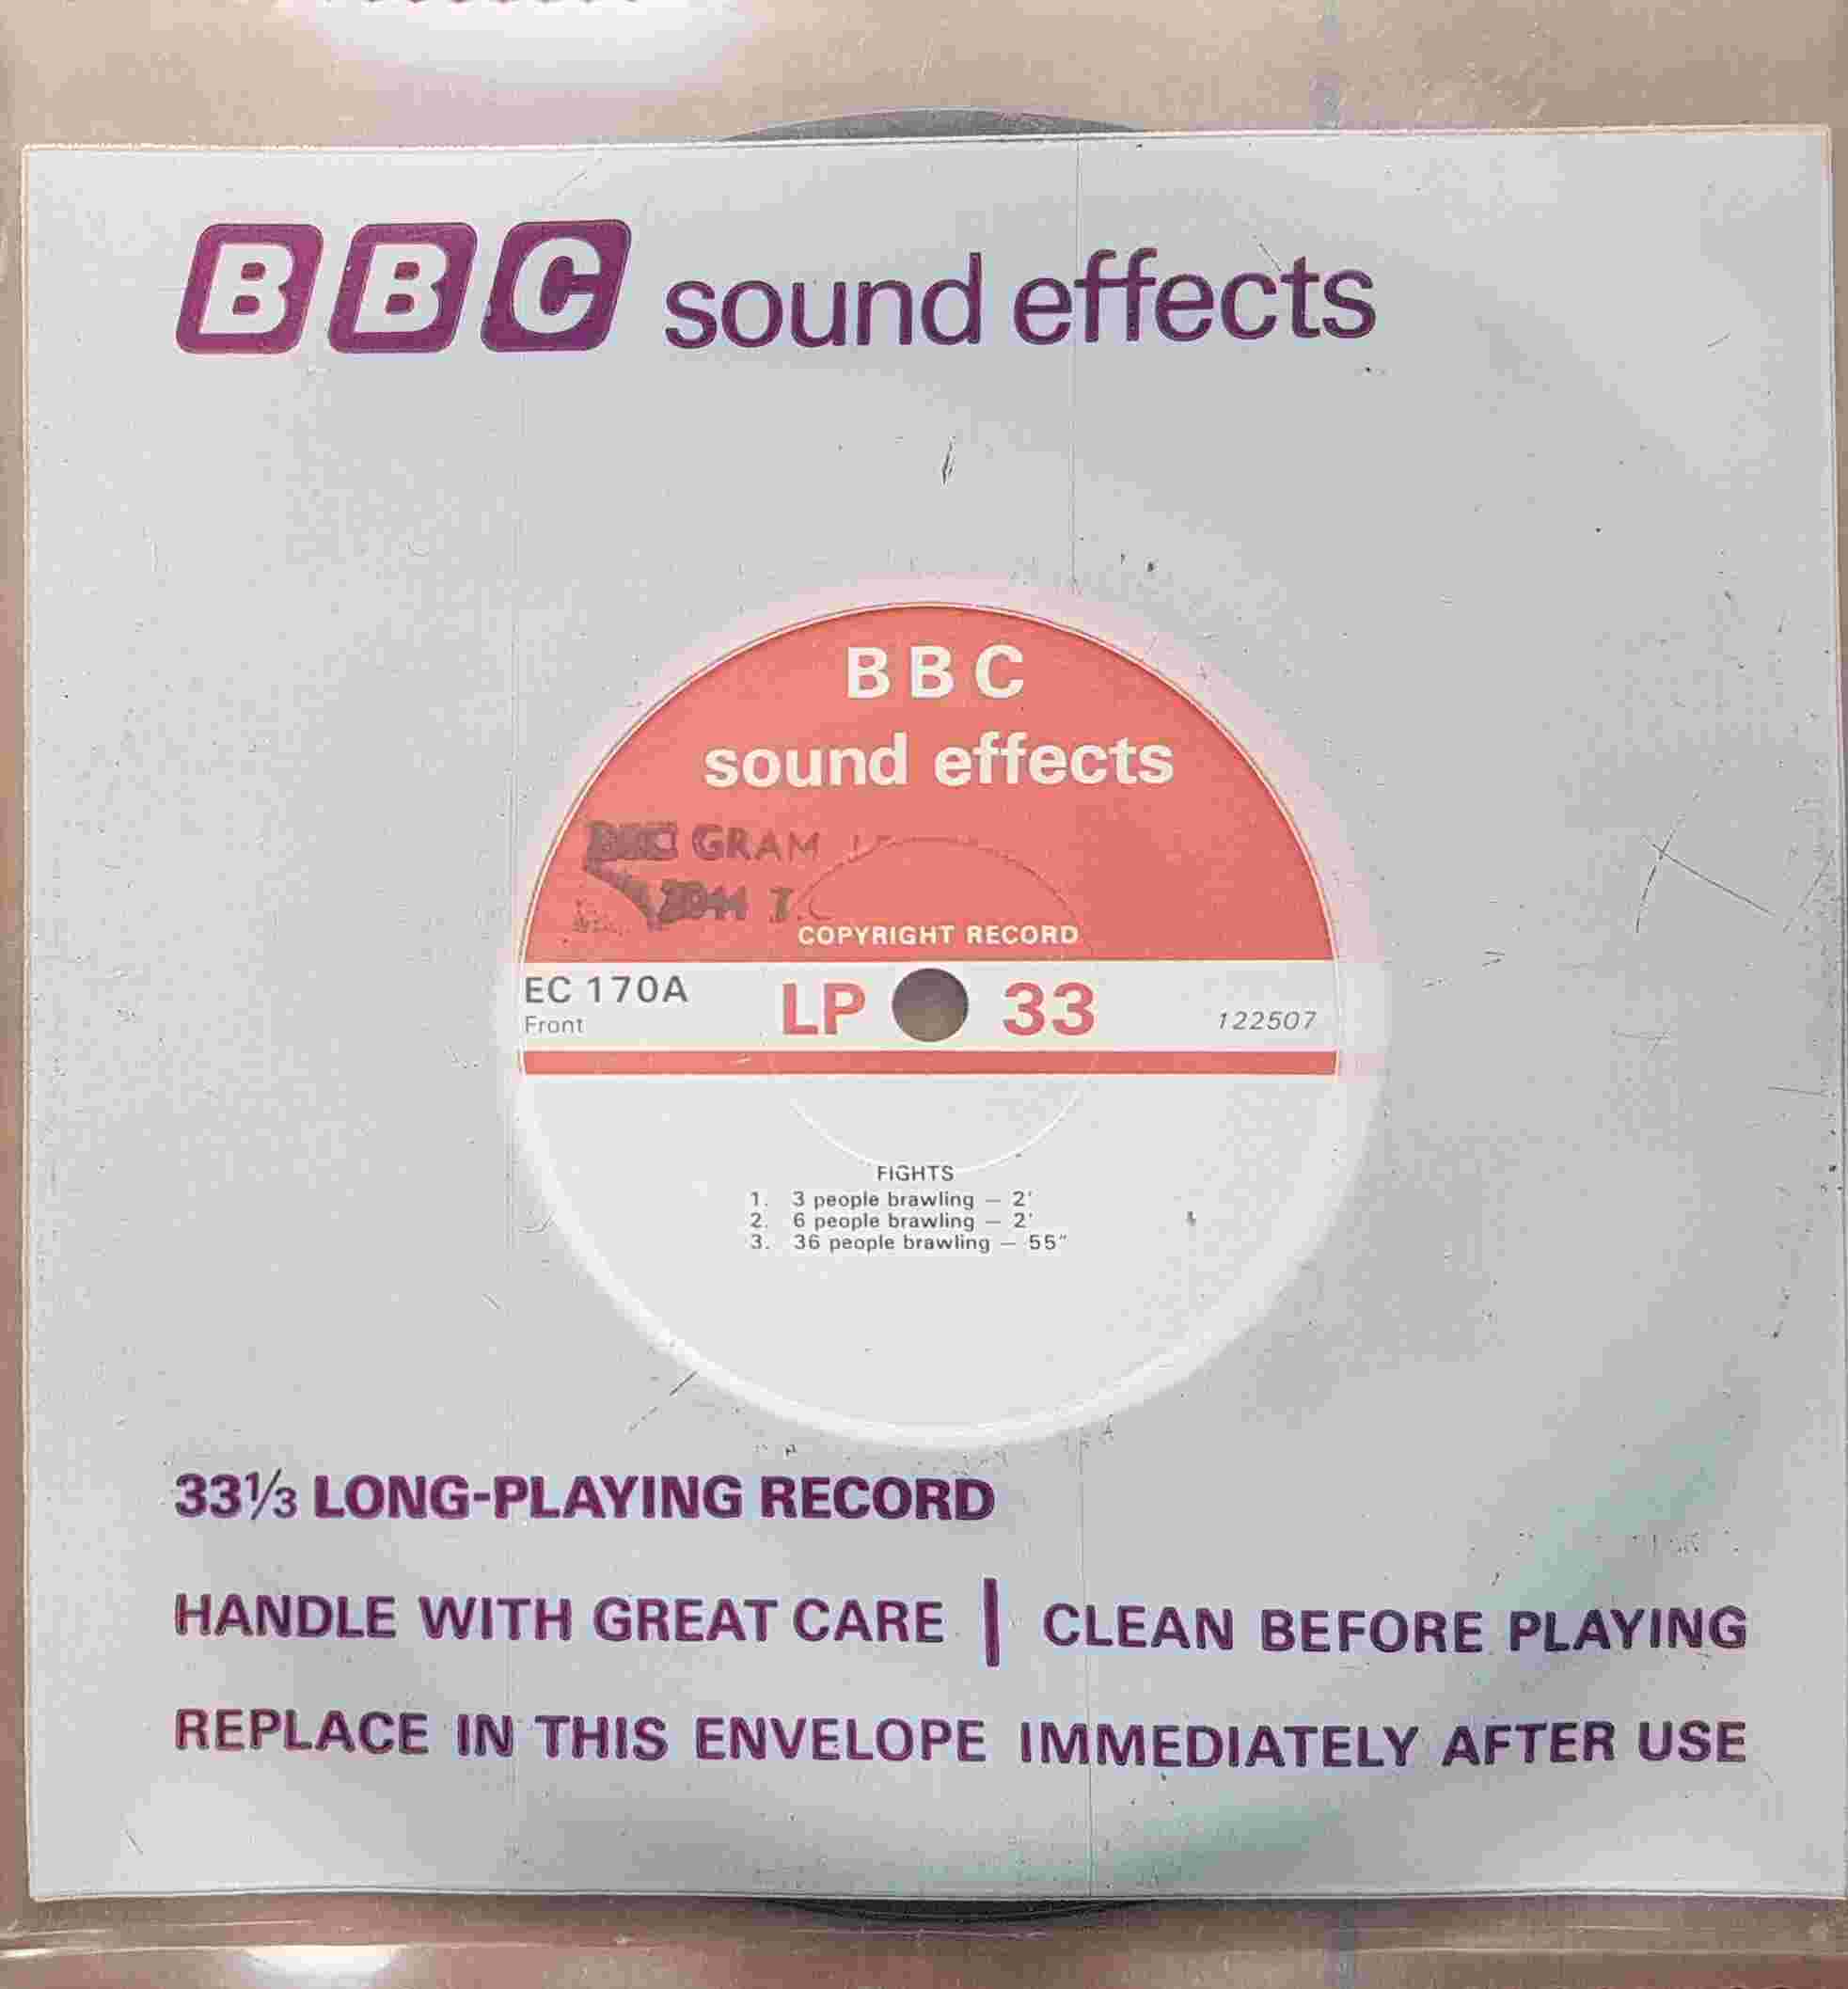 Picture of EC 170A Fights by artist Not registered from the BBC records and Tapes library